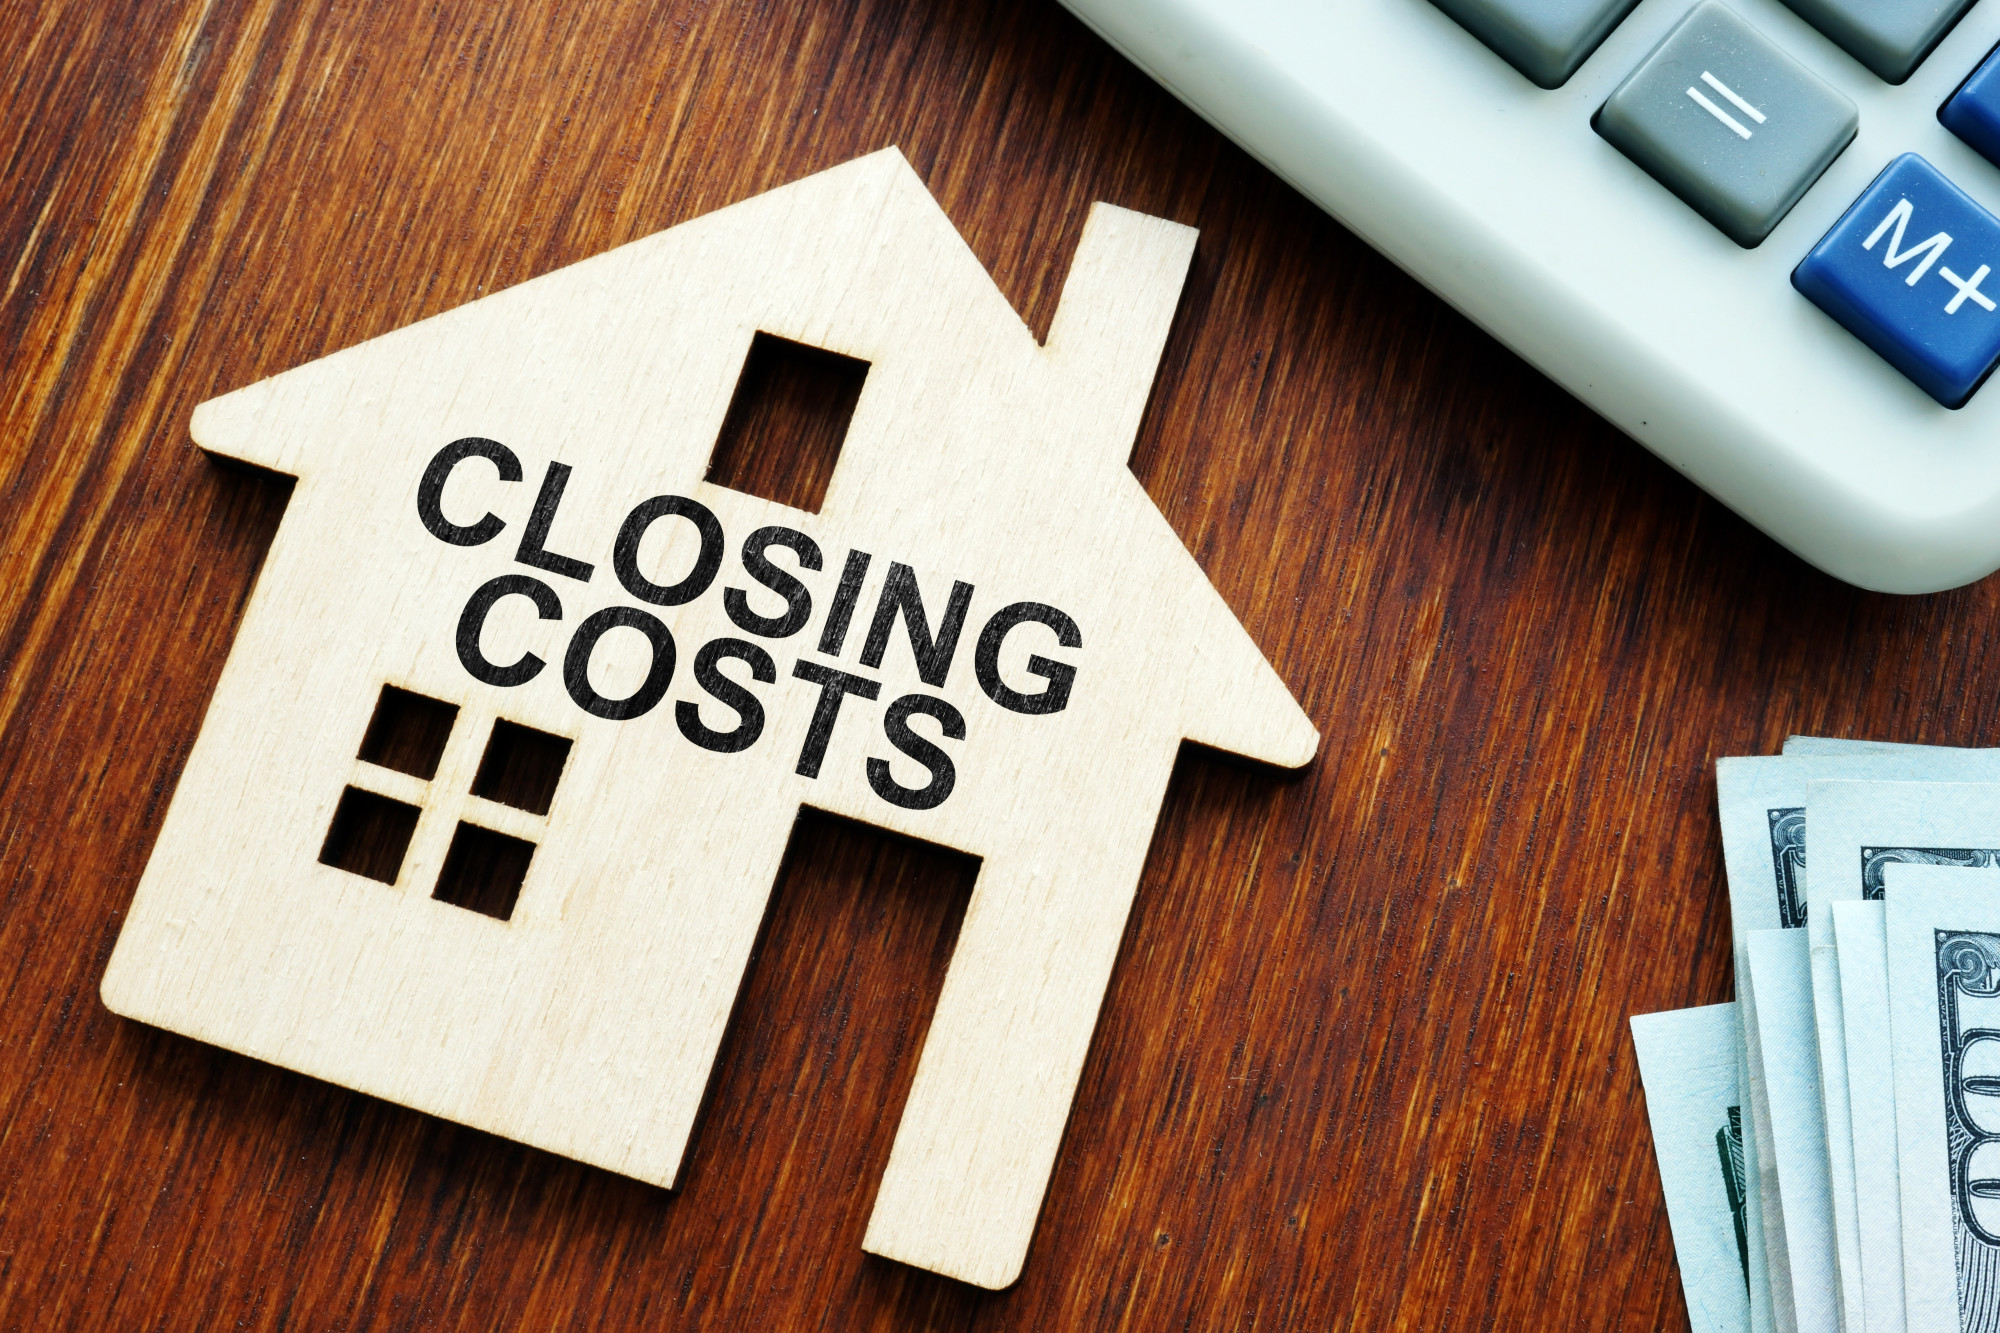 While we all know that buying a home involves fees and extra costs, there are some hidden home buying costs that people don't typically think of.